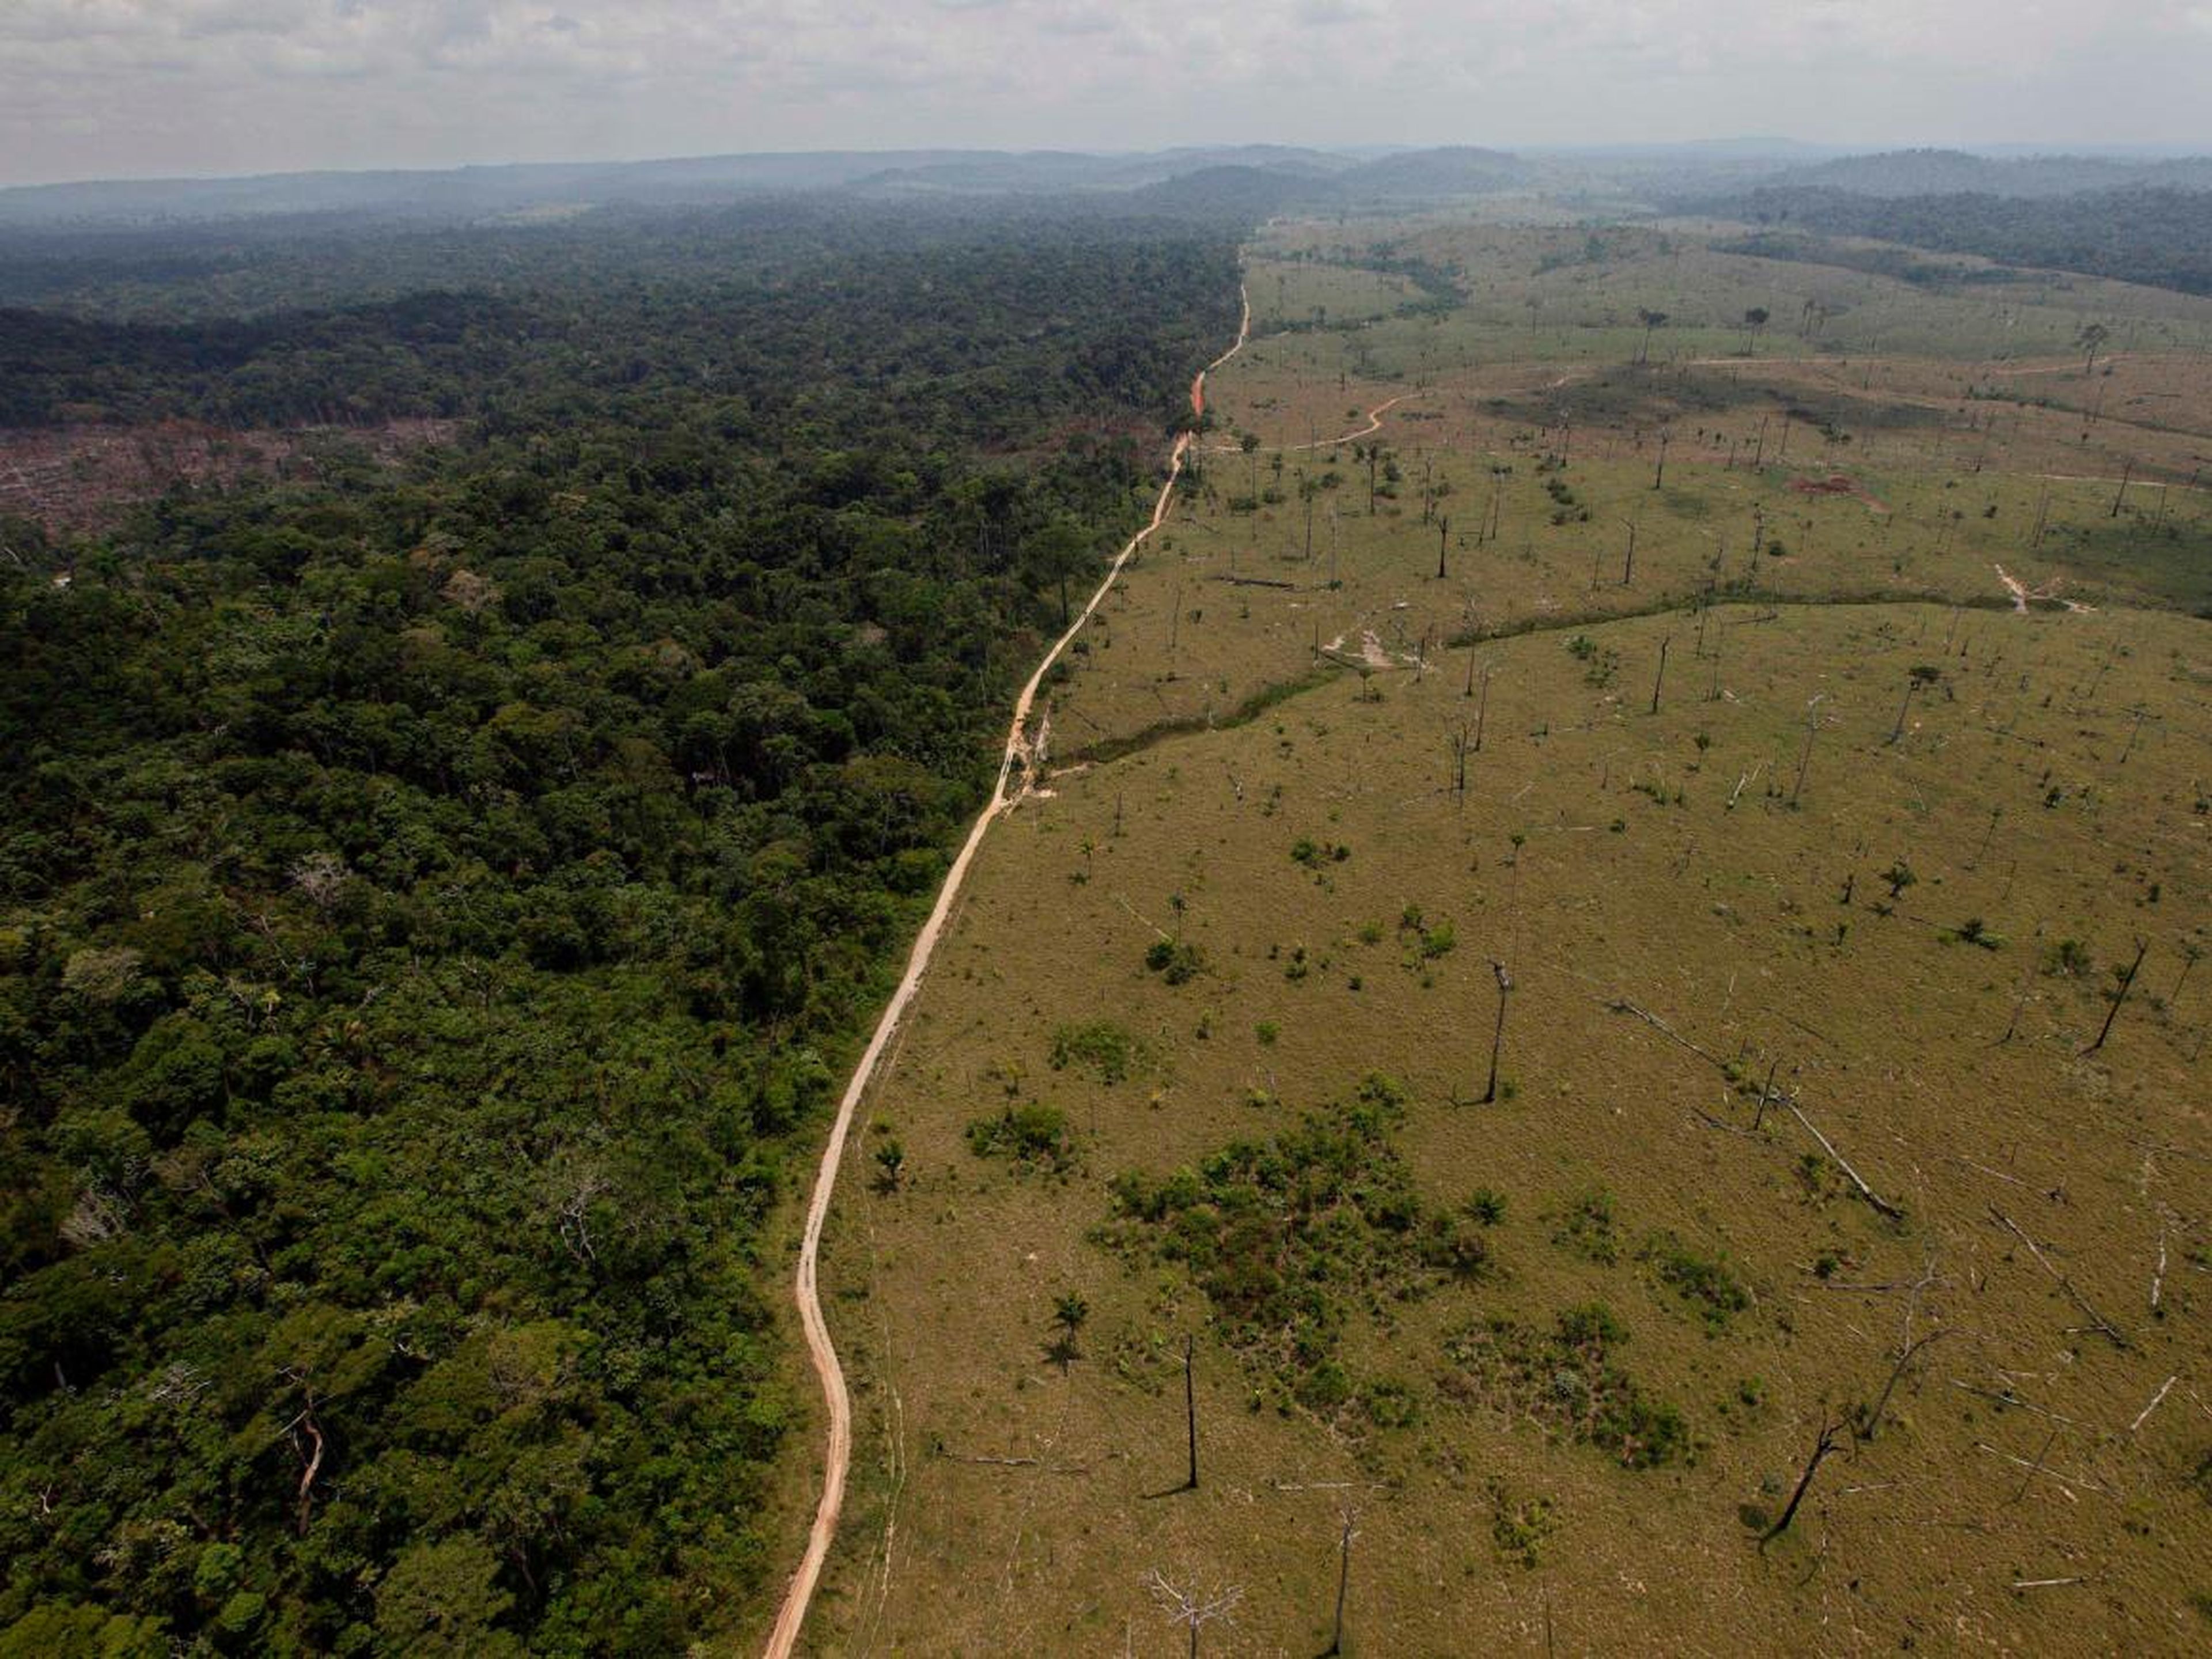 A September 15, 2009 photo shows a deforested area of the Amazon rainforest near Novo Progresso in Brazil's northern state of Para.